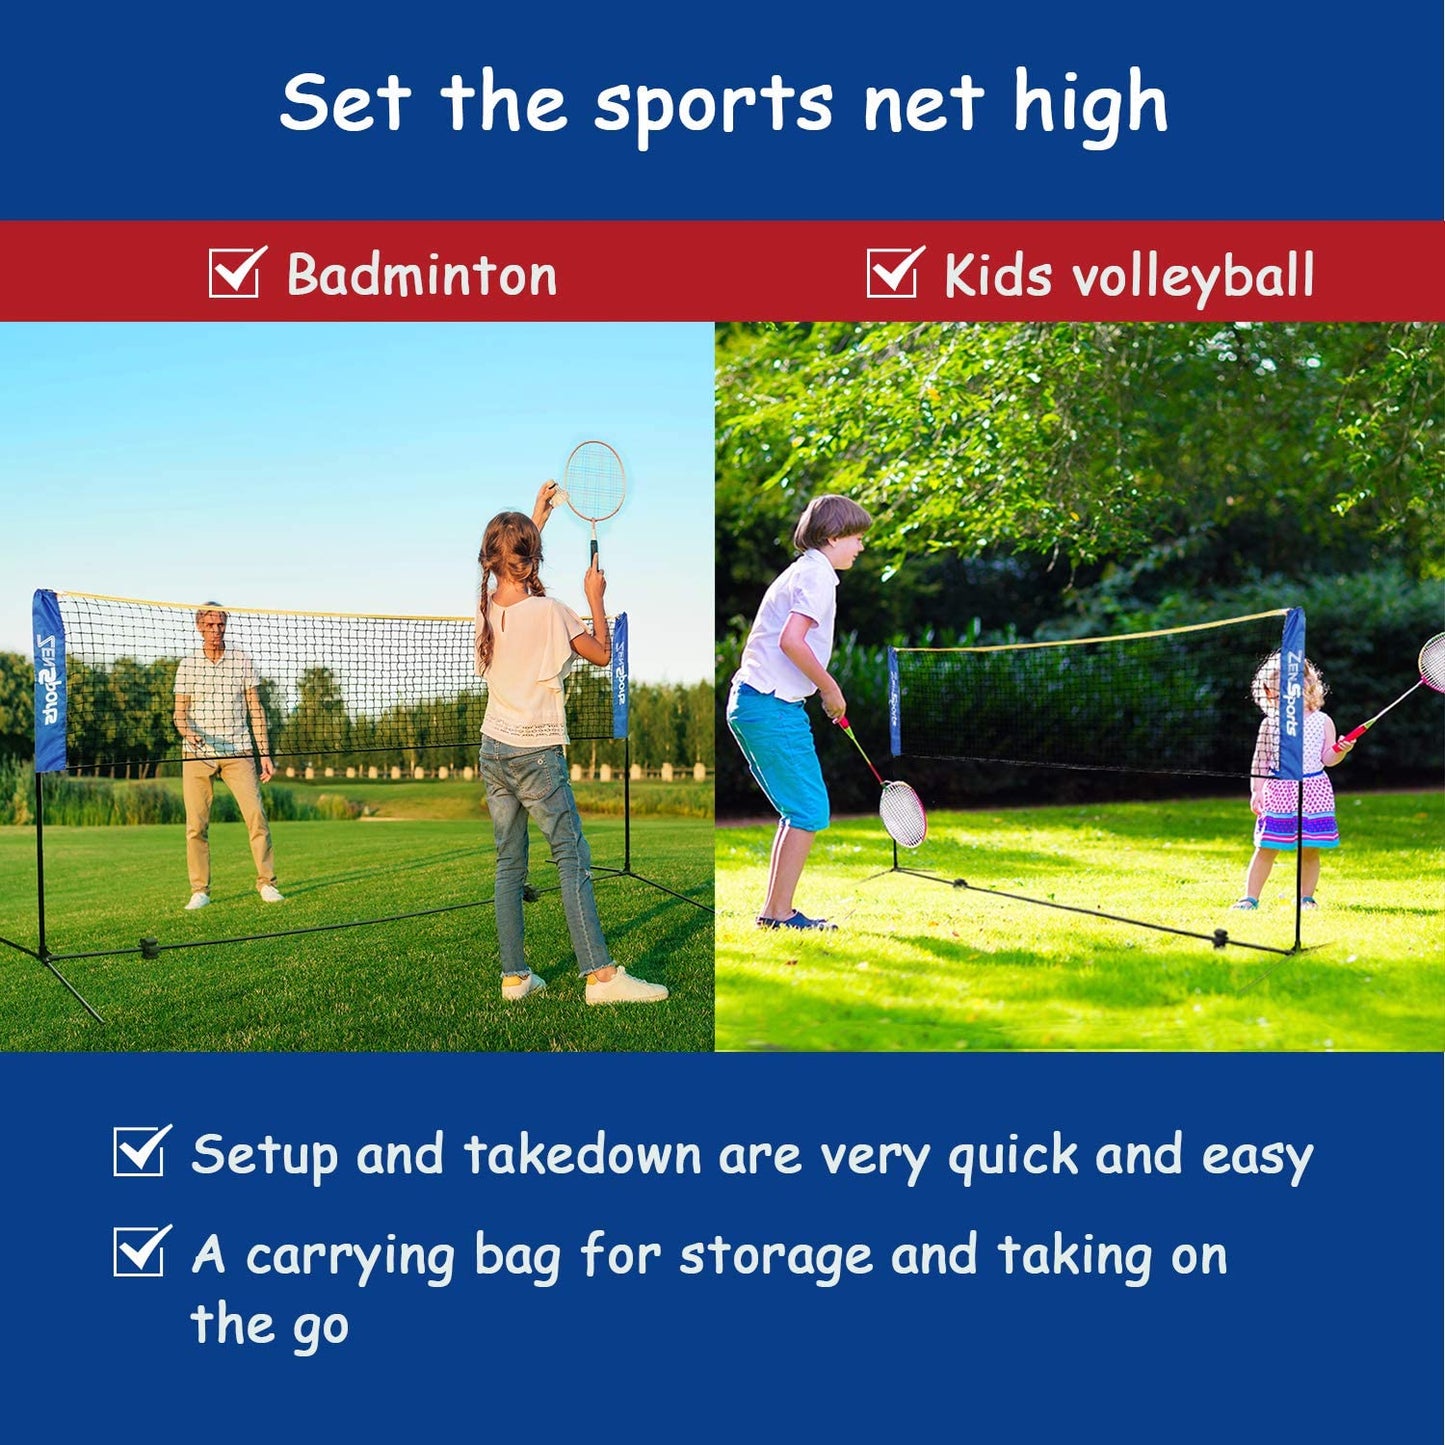 Portable Badminton Net Tennis Net for Soccer, Pickleball, Kids Volleyball Indoor Adjustable Height 2.5ft to 5ft for Outdoor Court Backyard Beach Games